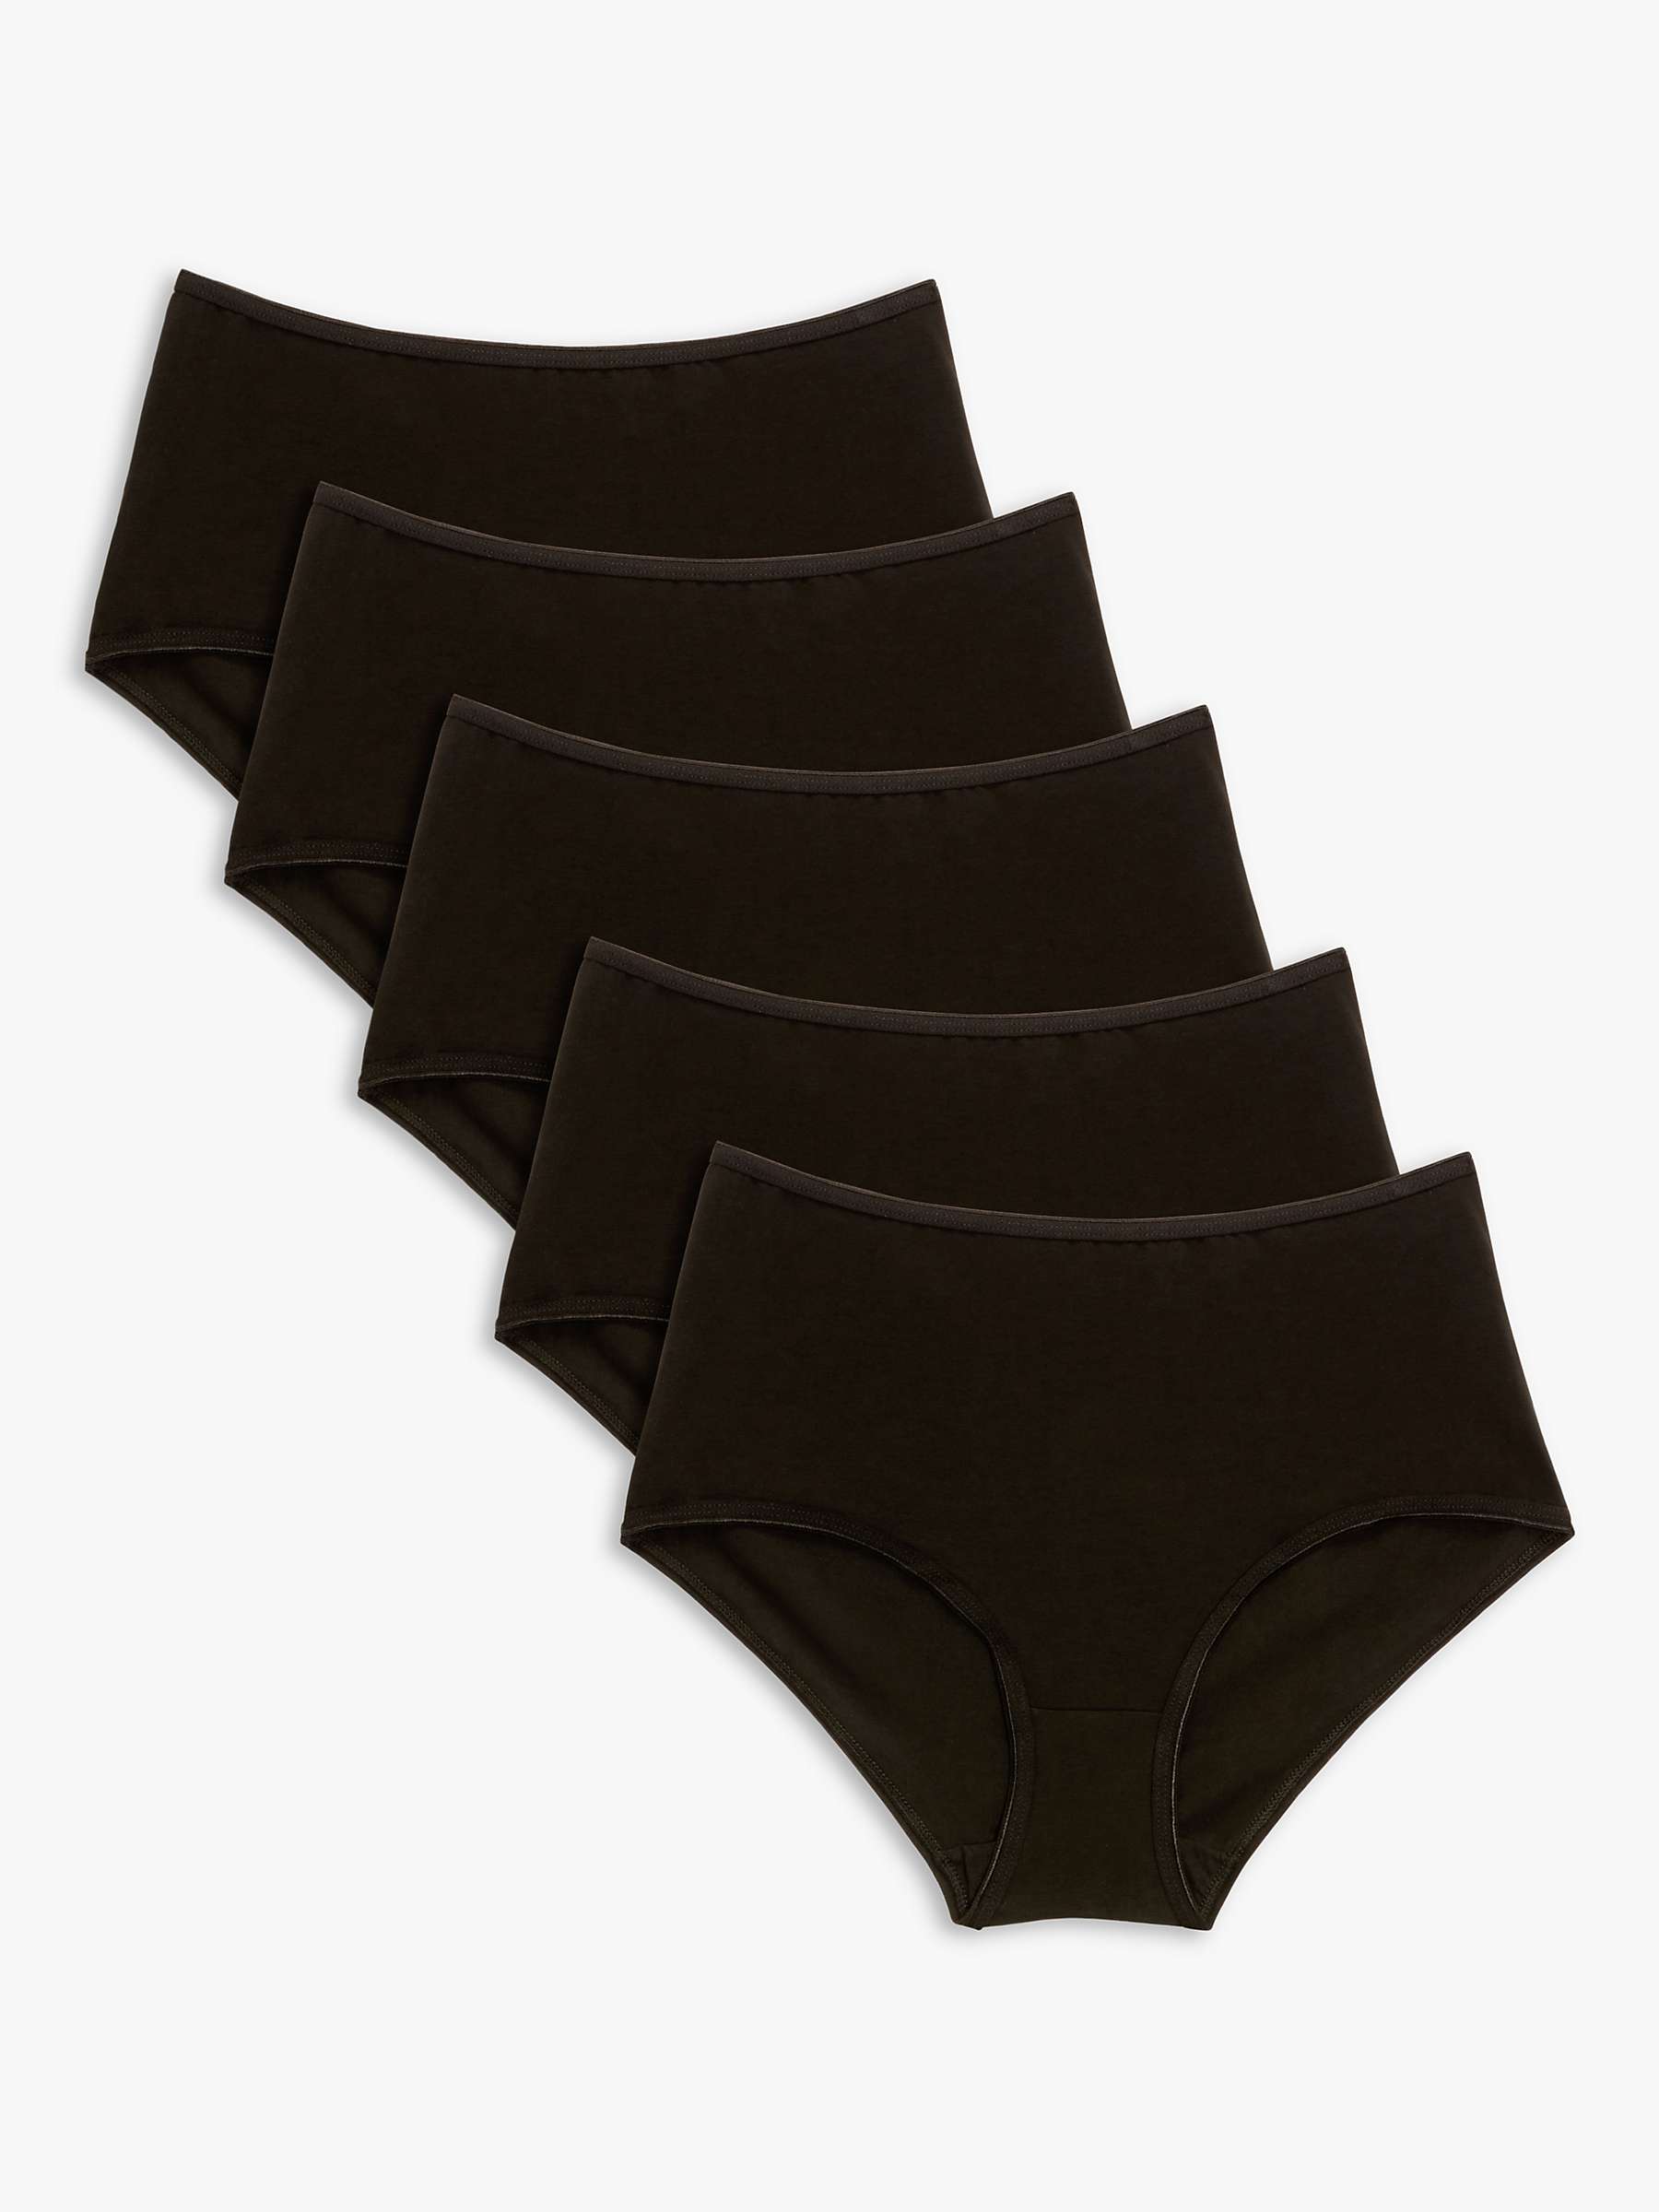 Buy John Lewis ANYDAY Cotton Full Briefs, Pack of 5 Online at johnlewis.com